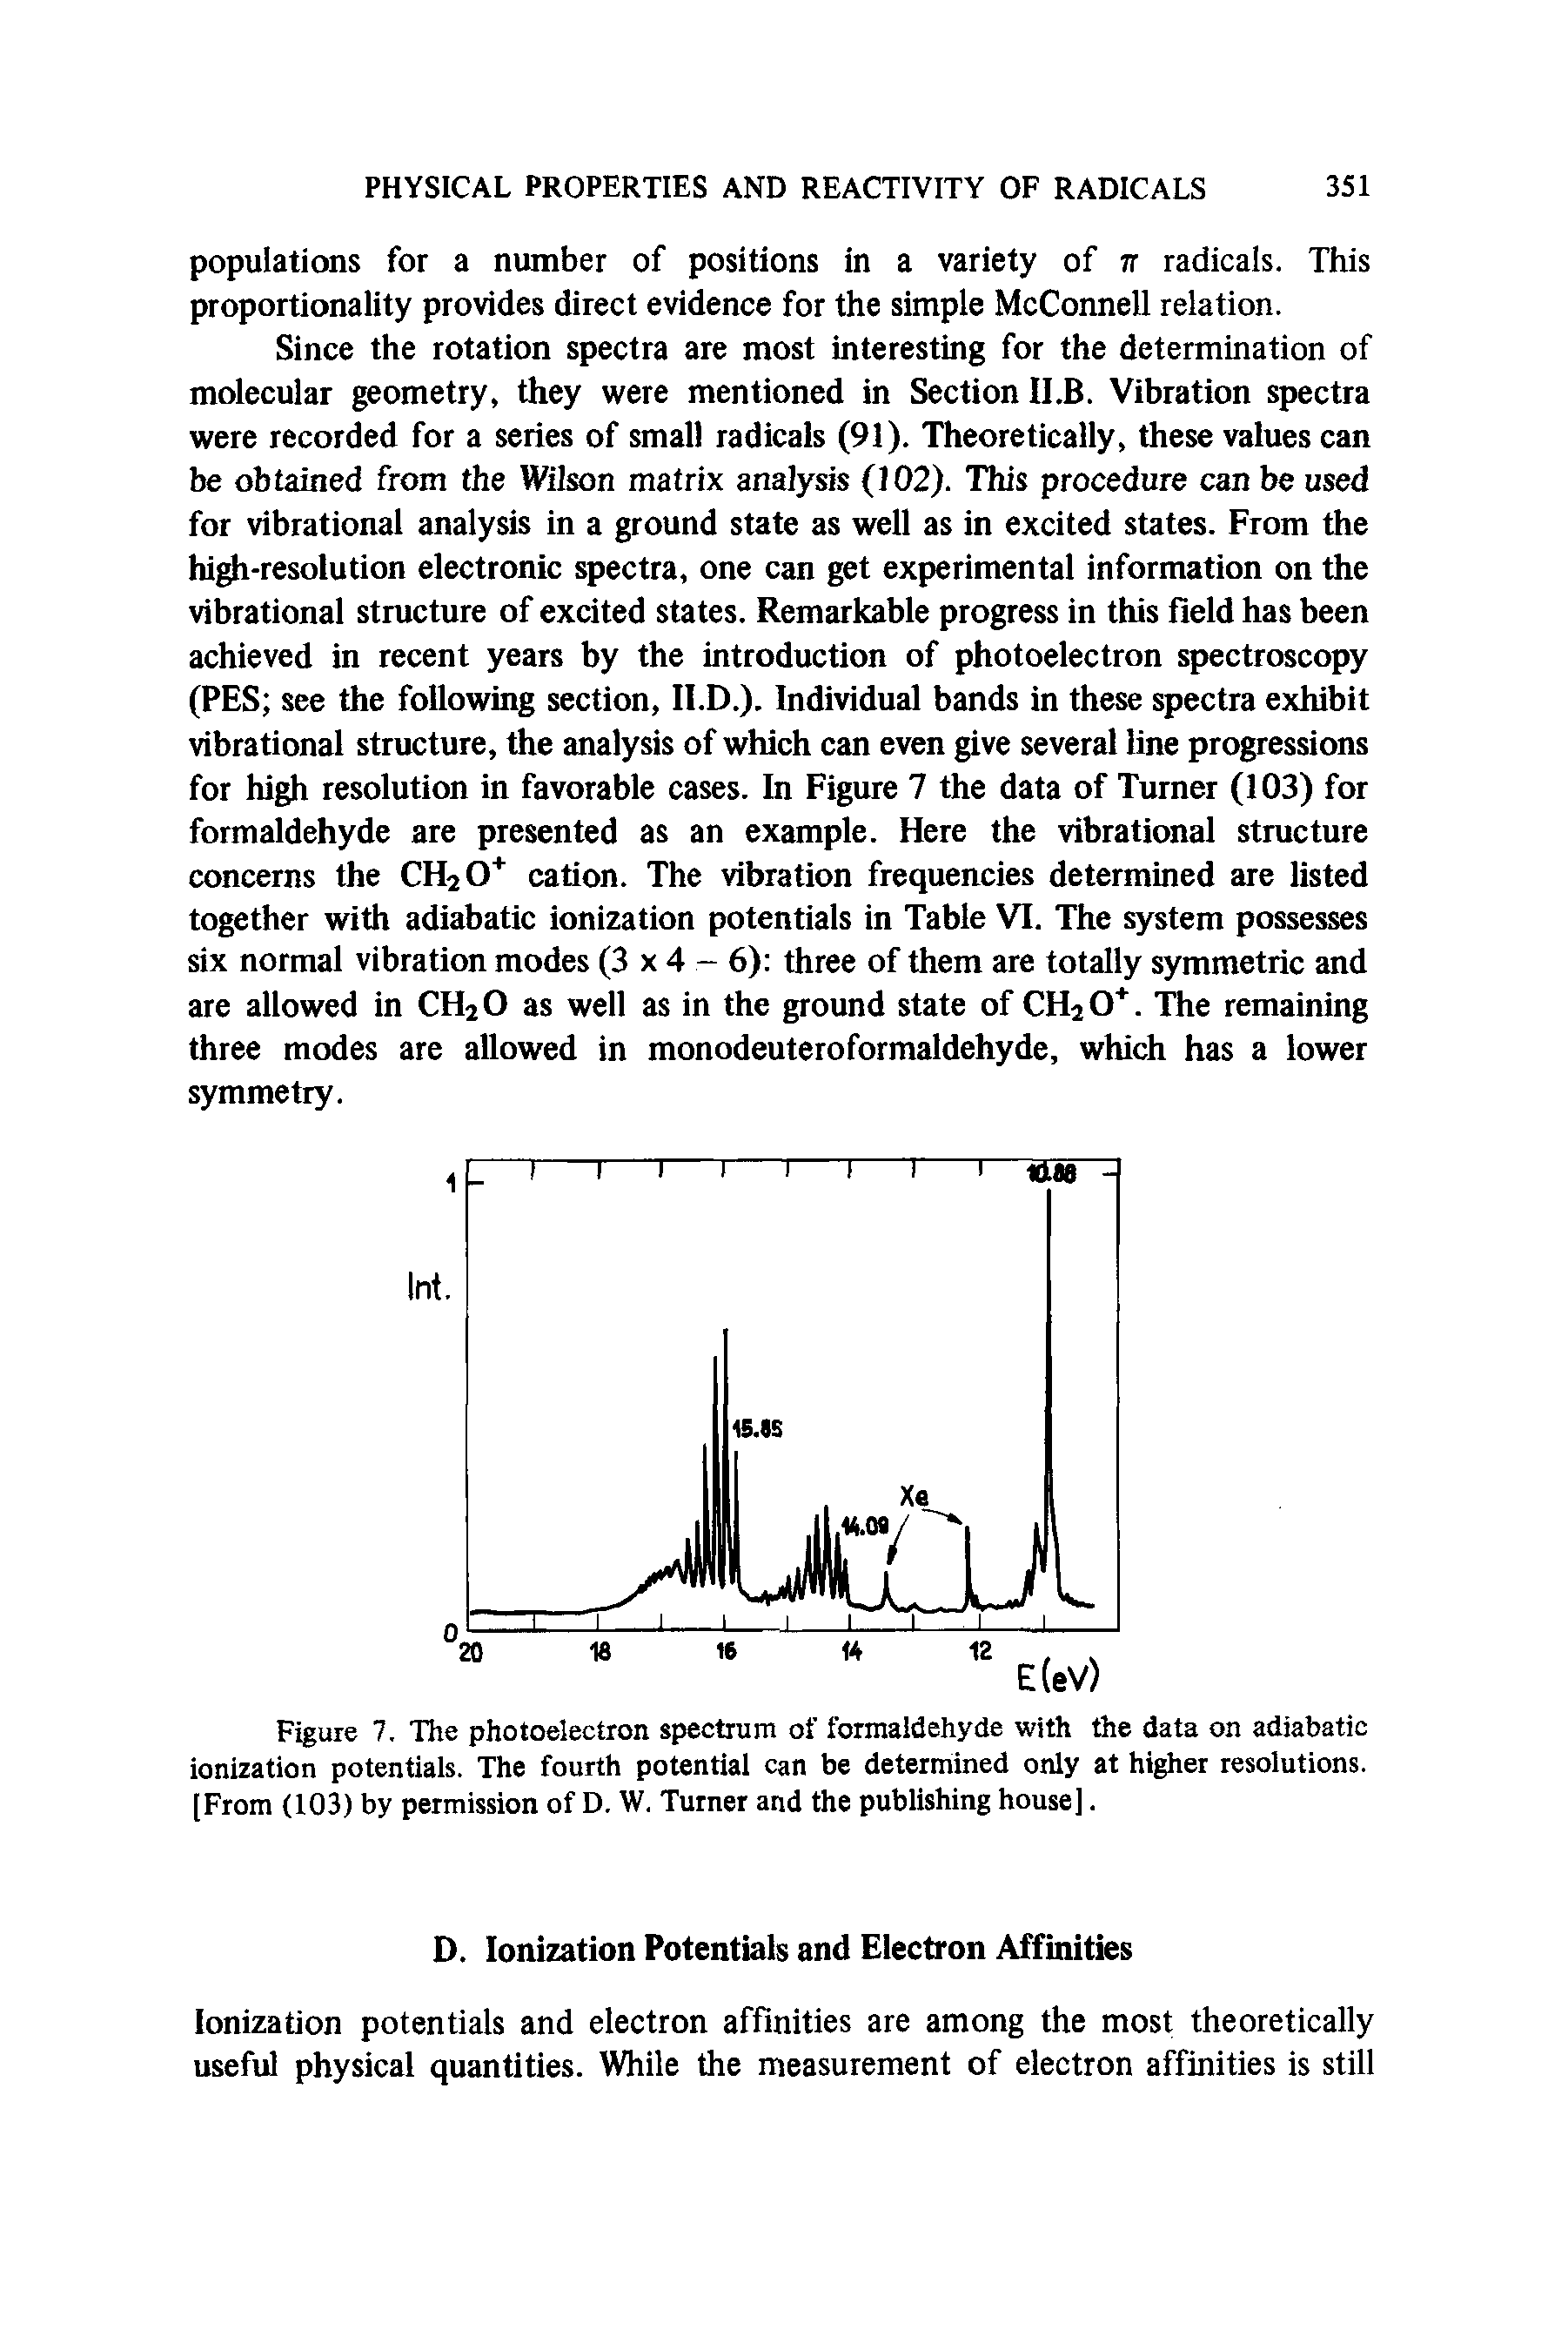 Figure 7. The photoelectron spectrum of formaldehyde with the data on adiabatic ionization potentials. The fourth potential can be determined only at higher resolutions. [From (103) by permission of D. W. Turner and the publishing house].